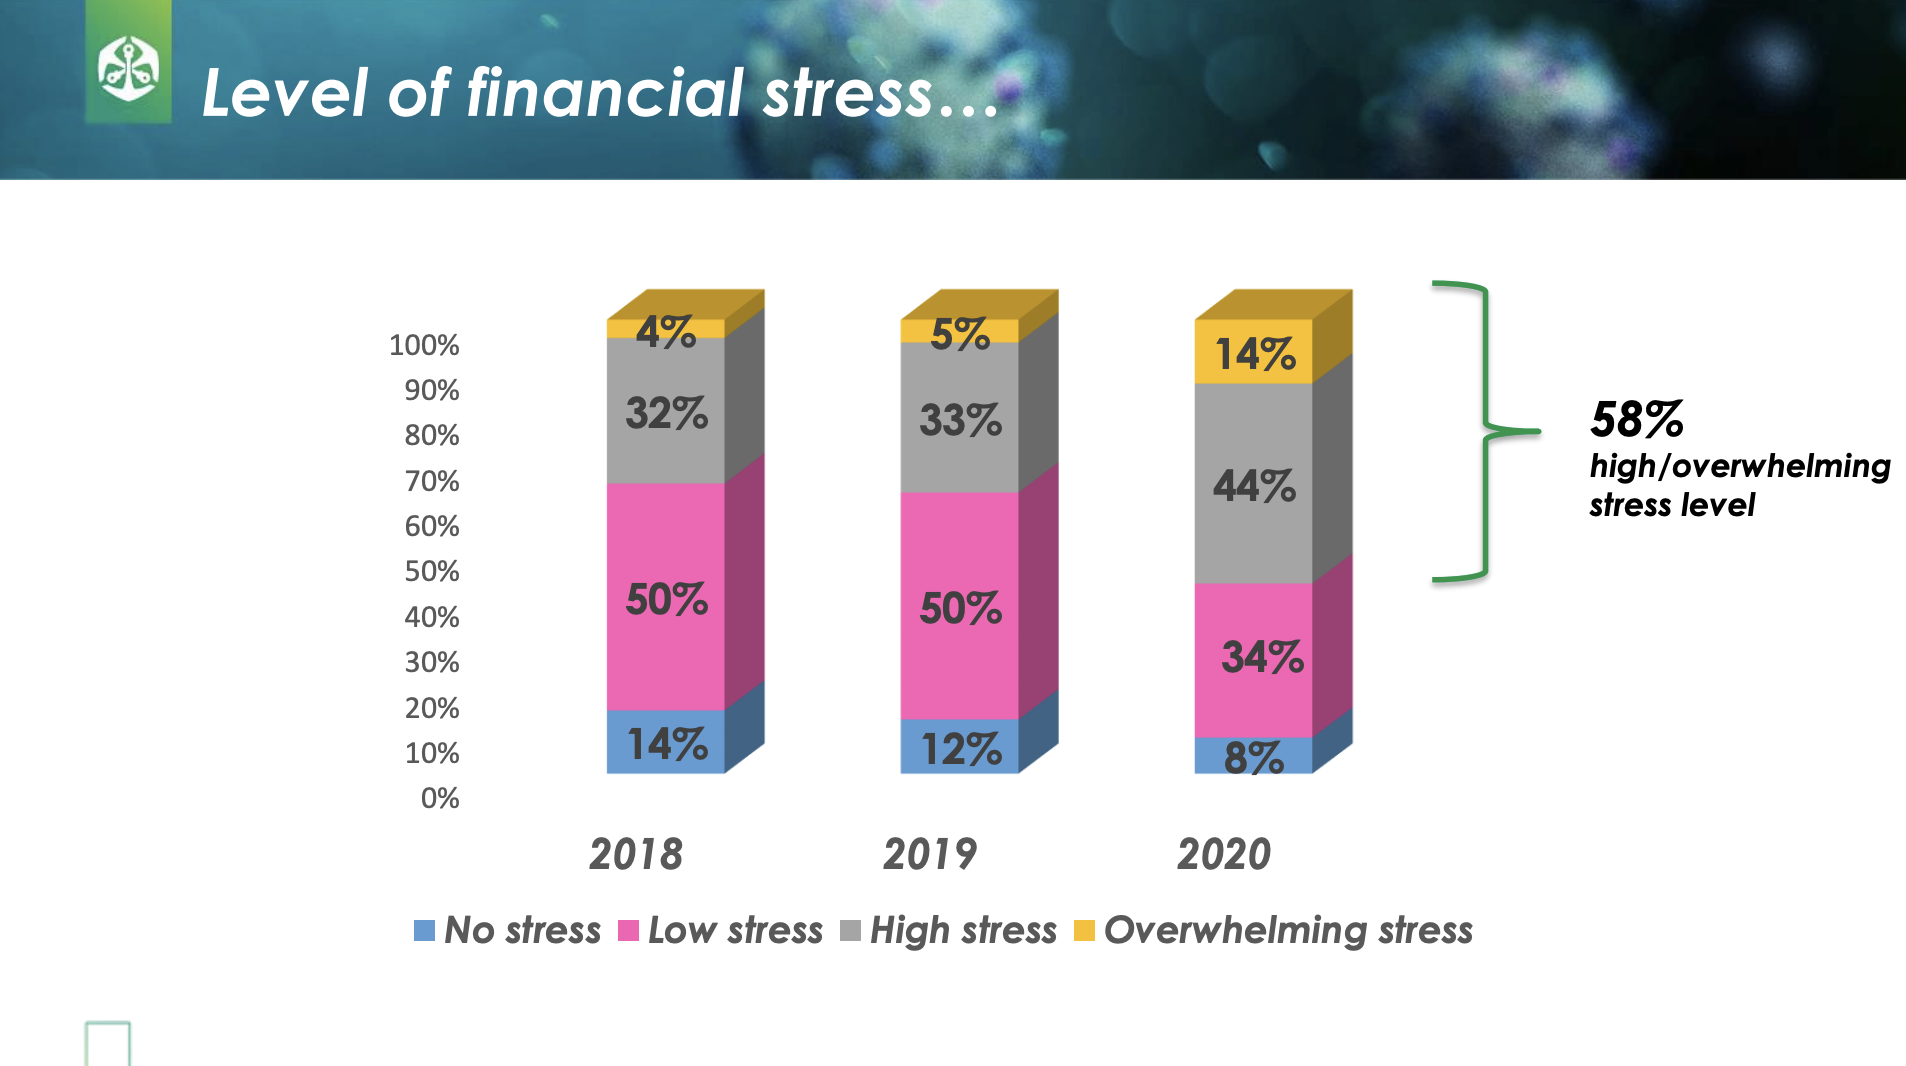 58% say they are experiencing high/overwhelming levels of financial stress